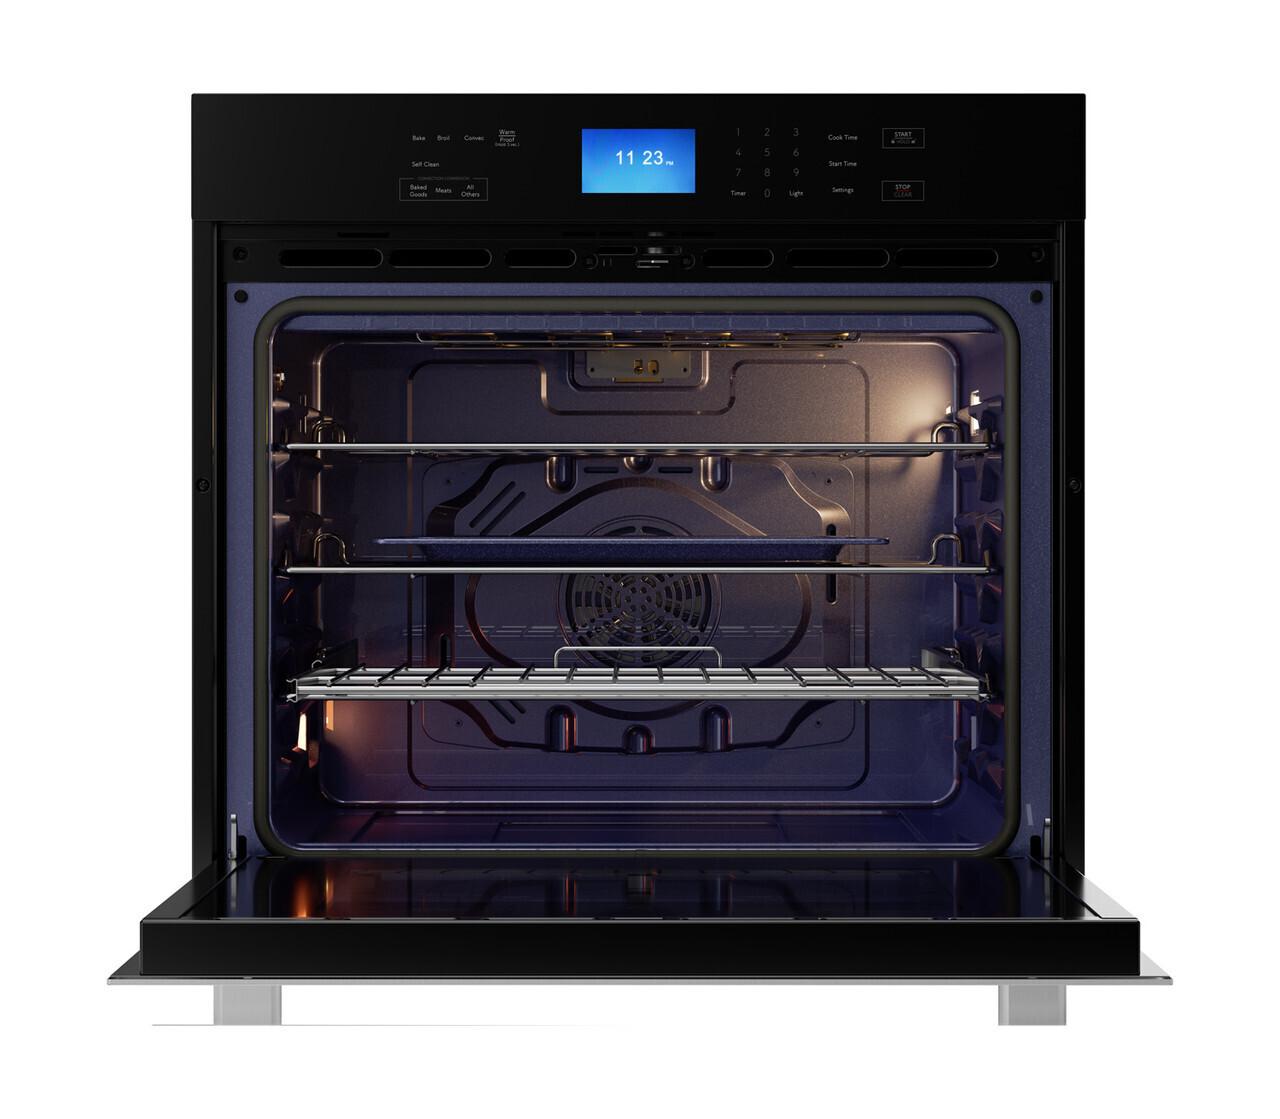 Sharp Stainless Steel European Convection Built-In Single Wall Oven